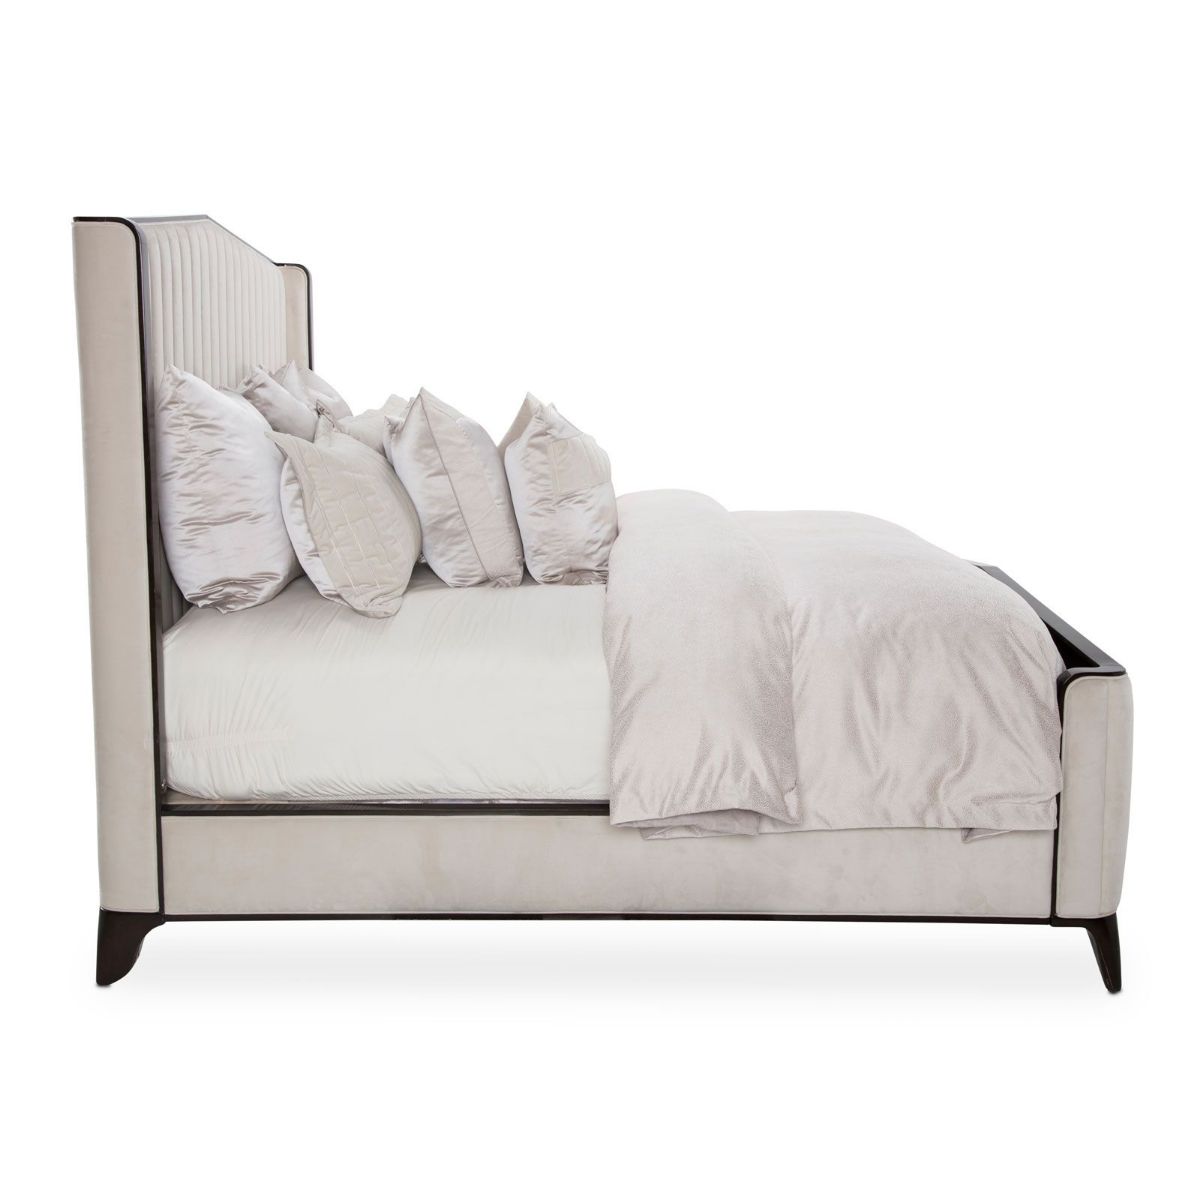 Picture of Paris Chic Upholstered King Bed